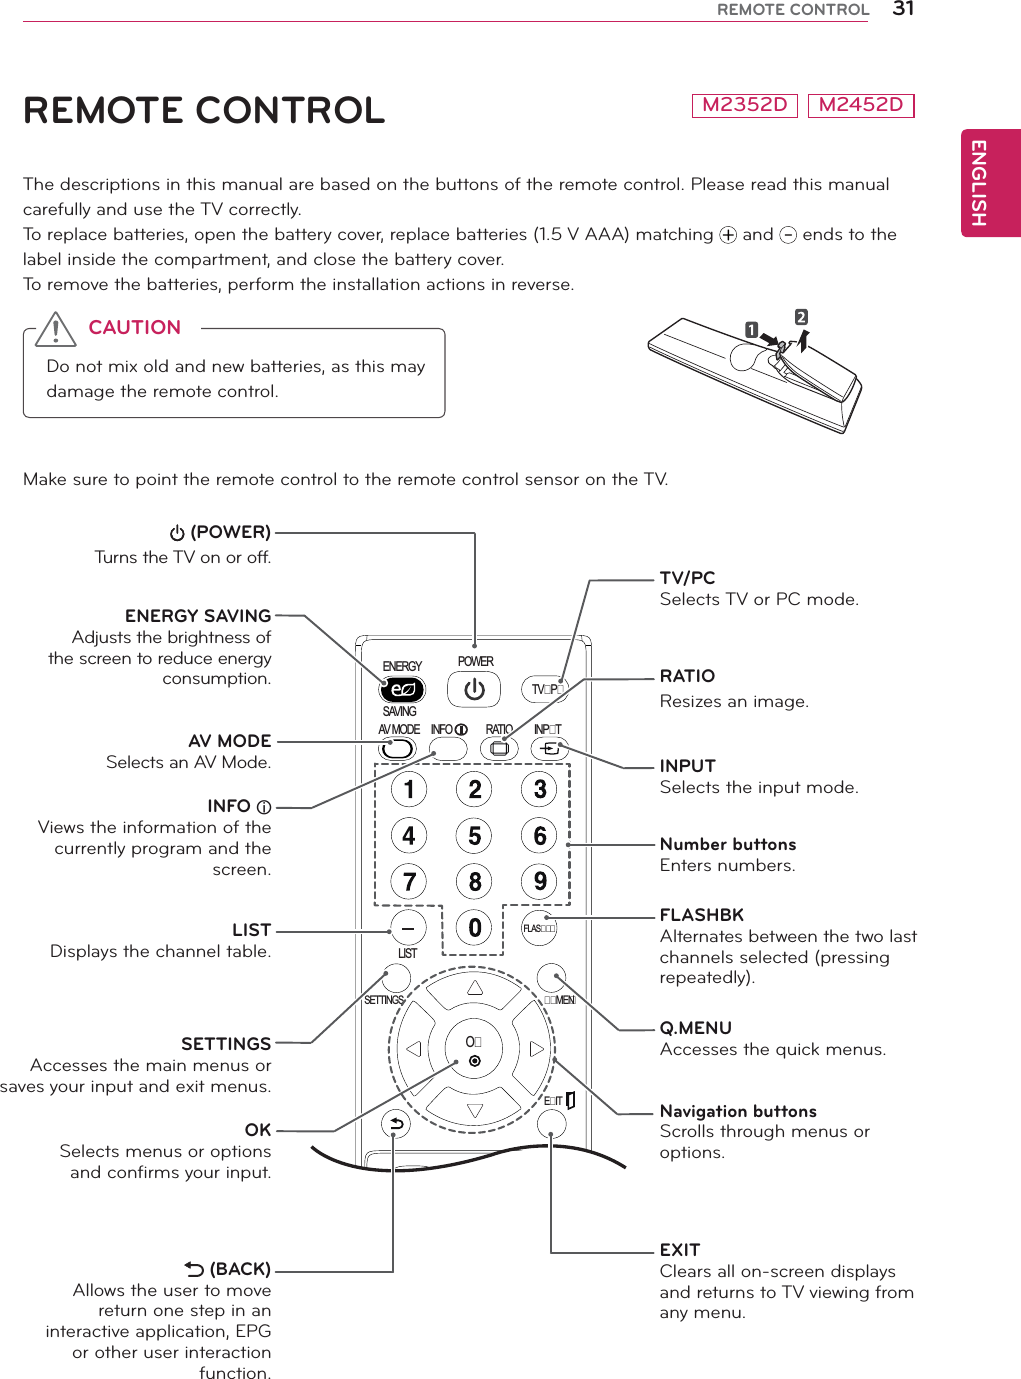 ENGLISH31REMOTE CONTROLThe descriptions in this manual are based on the buttons of the remote control. Please read this manual carefully and use the TV correctly.To replace batteries, open the battery cover, replace batteries (1.5 V AAA) matching   and   ends to the label inside the compartment, and close the battery cover.To remove the batteries, perform the installation actions in reverse.Make sure to point the remote control to the remote control sensor on the TV.CAUTIONDo not mix old and new batteries, as this may damage the remote control.POWERENERGYSAVINGINFOAV MODELISTSETTINGS MENEITFAVA PIPMTEVOLPAGEOFLASRATIOTVPINPT (POWER)Turns the TV on or off.LISTDisplays the channel table.INPUTSelects the input mode.TV/PCSelects TV or PC mode.FLASHBKAlternates between the two last channels selected (pressing repeatedly).INFO ۘViews the information of the currently program and the screen.AV MODESelects an AV Mode.RATIOResizes an image.REMOTE CONTROLOKSelects menus or options and confirms your input. (BACK)Allows the user to move return one step in an interactive application, EPG or other user interaction function.Q.MENUAccesses the quick menus. EXITClears all on-screen displays and returns to TV viewing from any menu. ENERGY SAVINGAdjusts the brightness of the screen to reduce energy consumption.Number buttonsEnters numbers.SETTINGS Accesses the main menus or saves your input and exit menus.Navigation buttons Scrolls through menus or options.M2352D M2452D